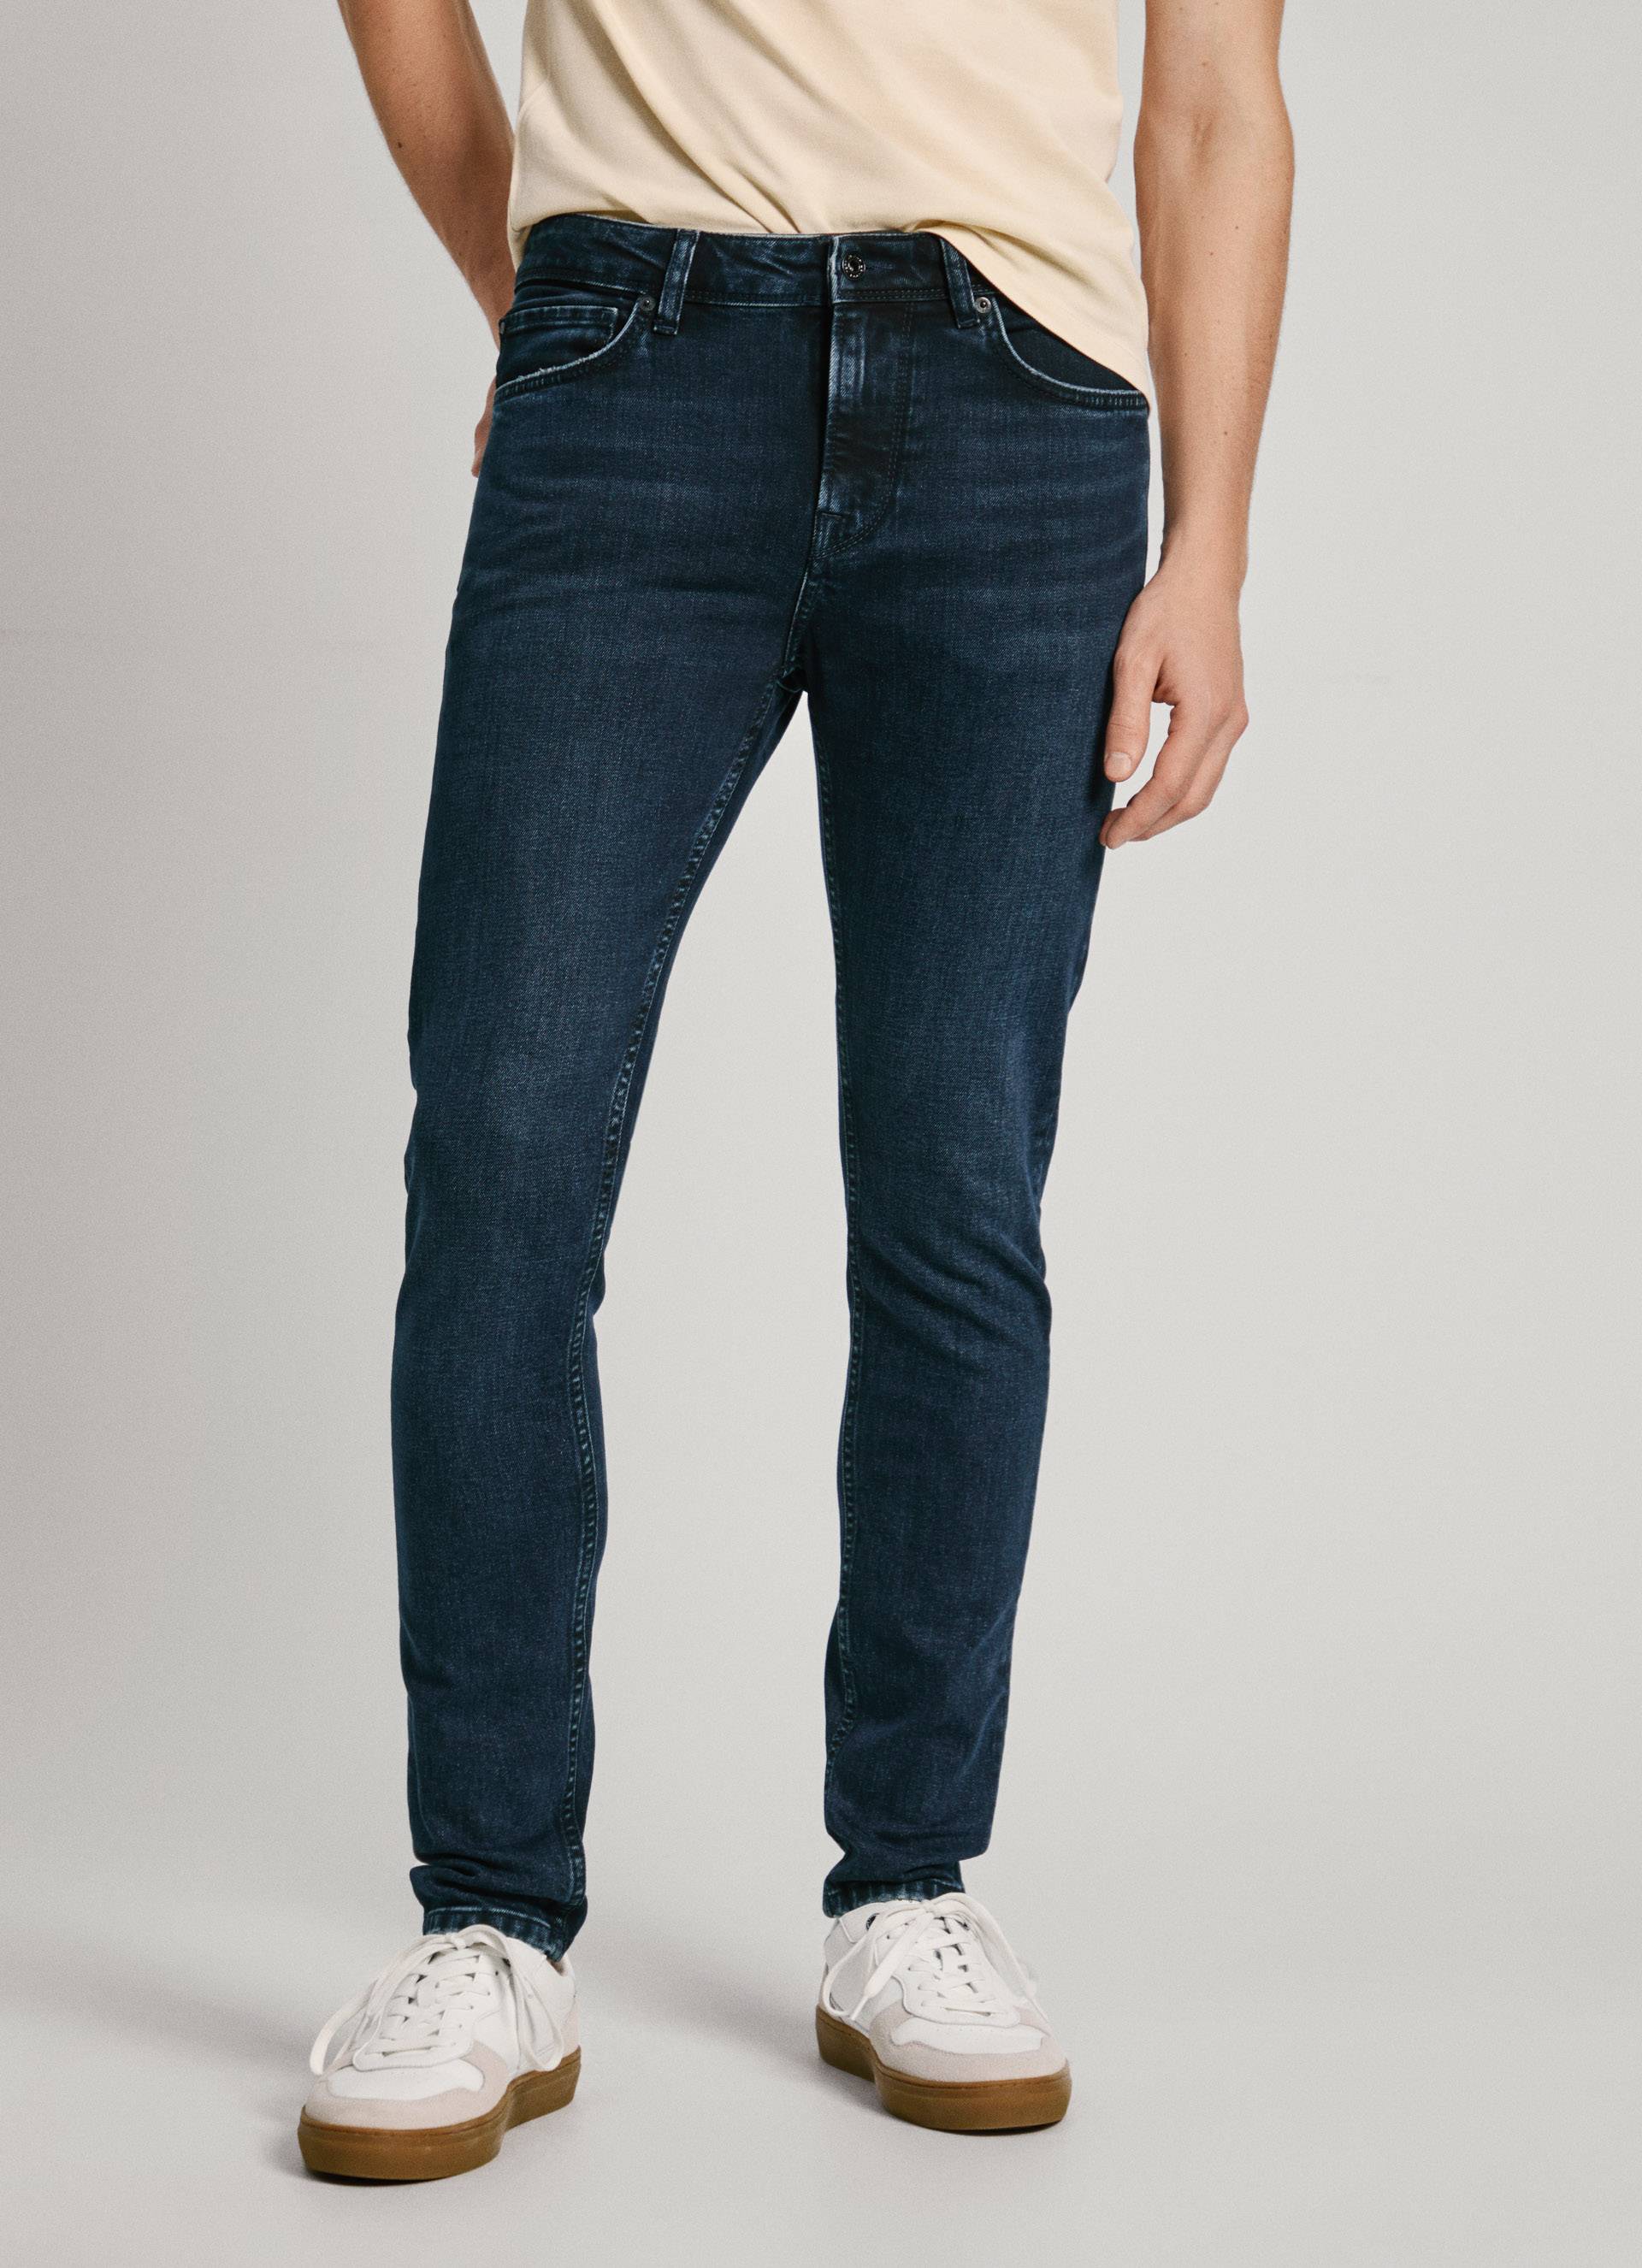 Pepe Jeans Skinny-fit-Jeans »SKINNY JEANS« von Pepe Jeans